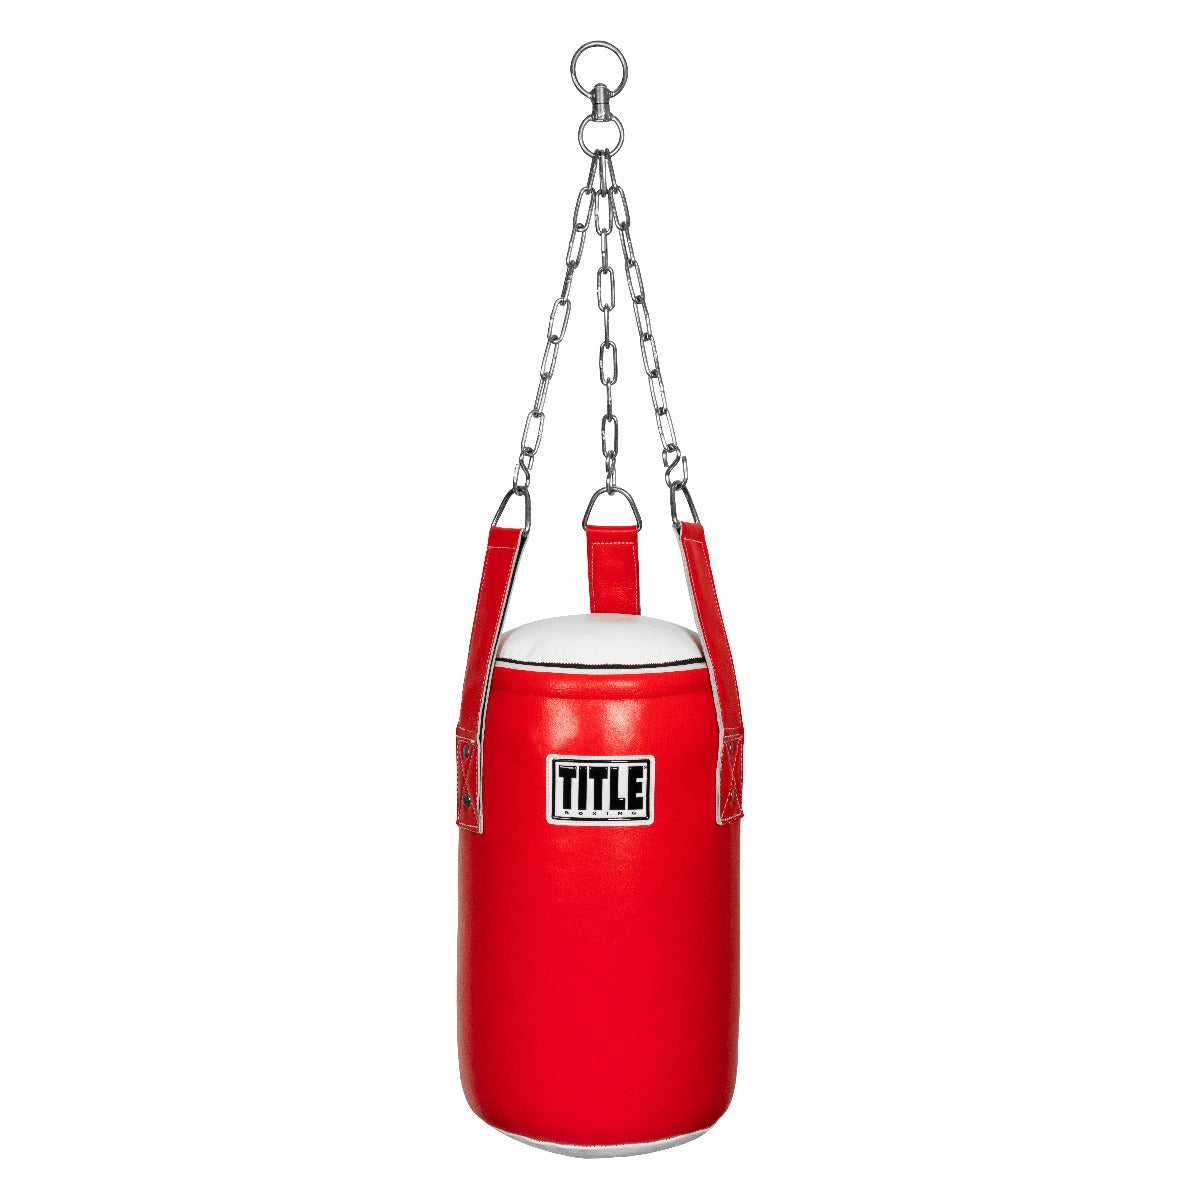 Traditional Heavy Bag From Century Kickboxing